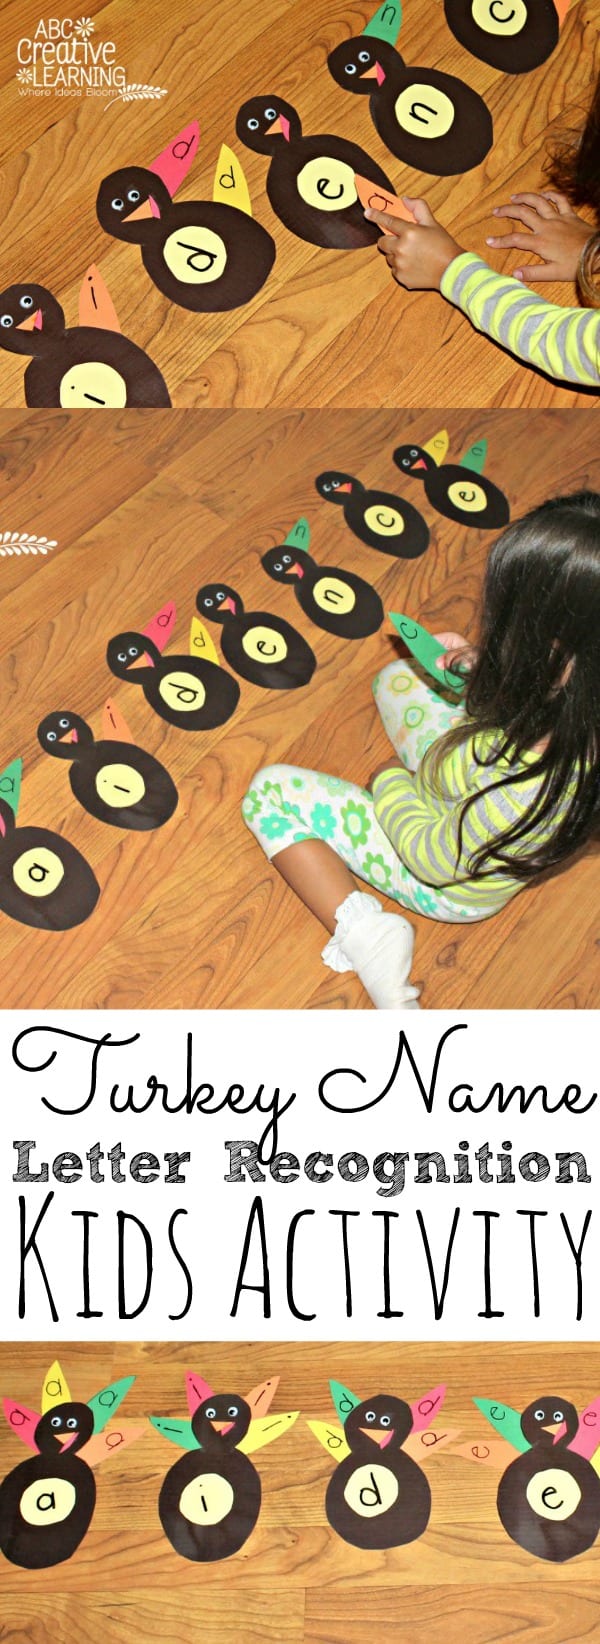 Turkey Name and Letter Recognition Activity